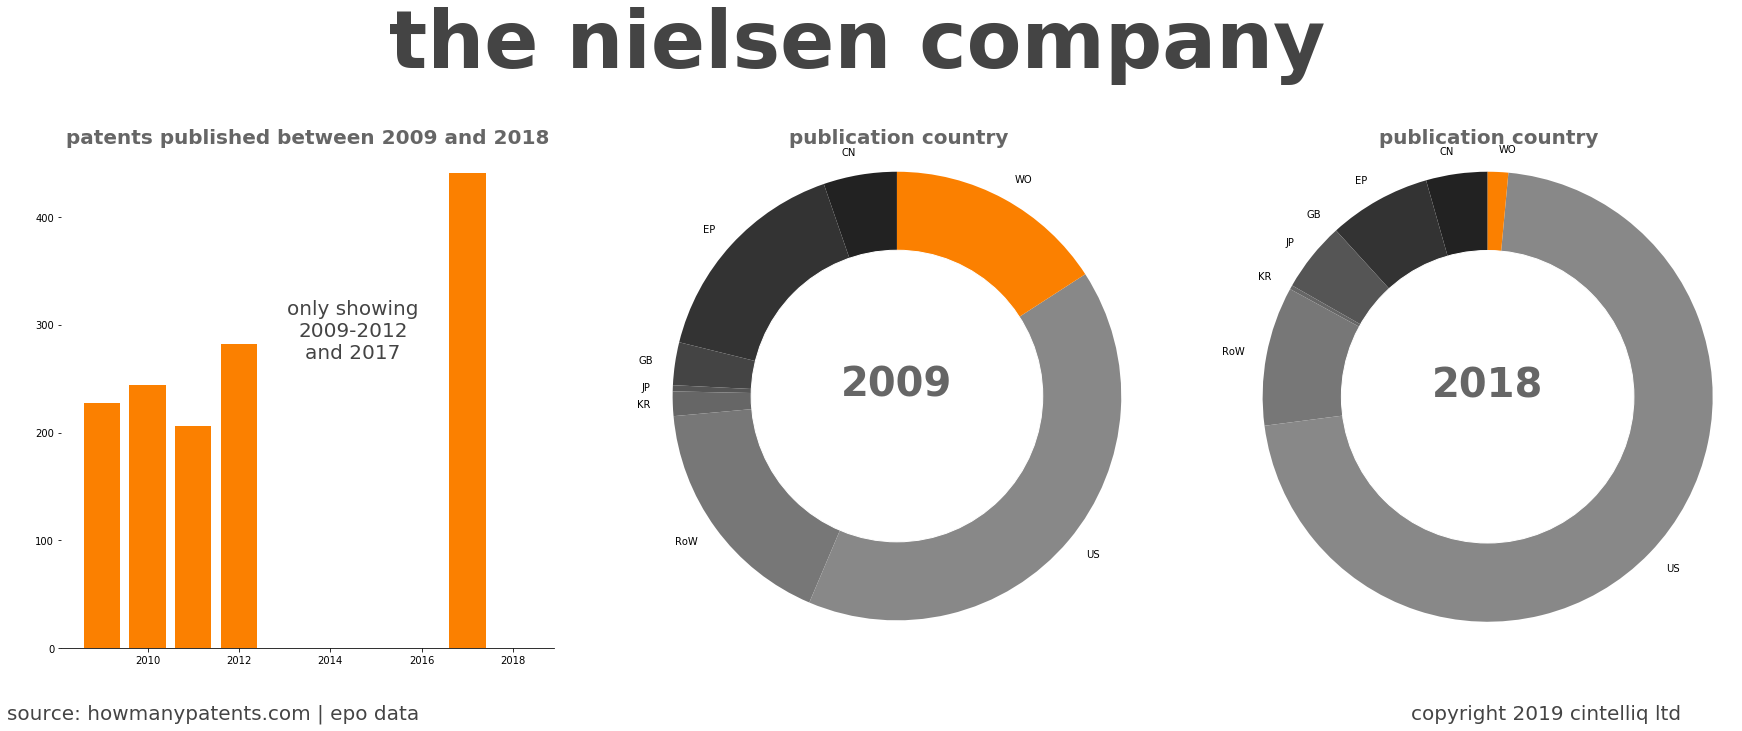 summary of patents for The Nielsen Company 